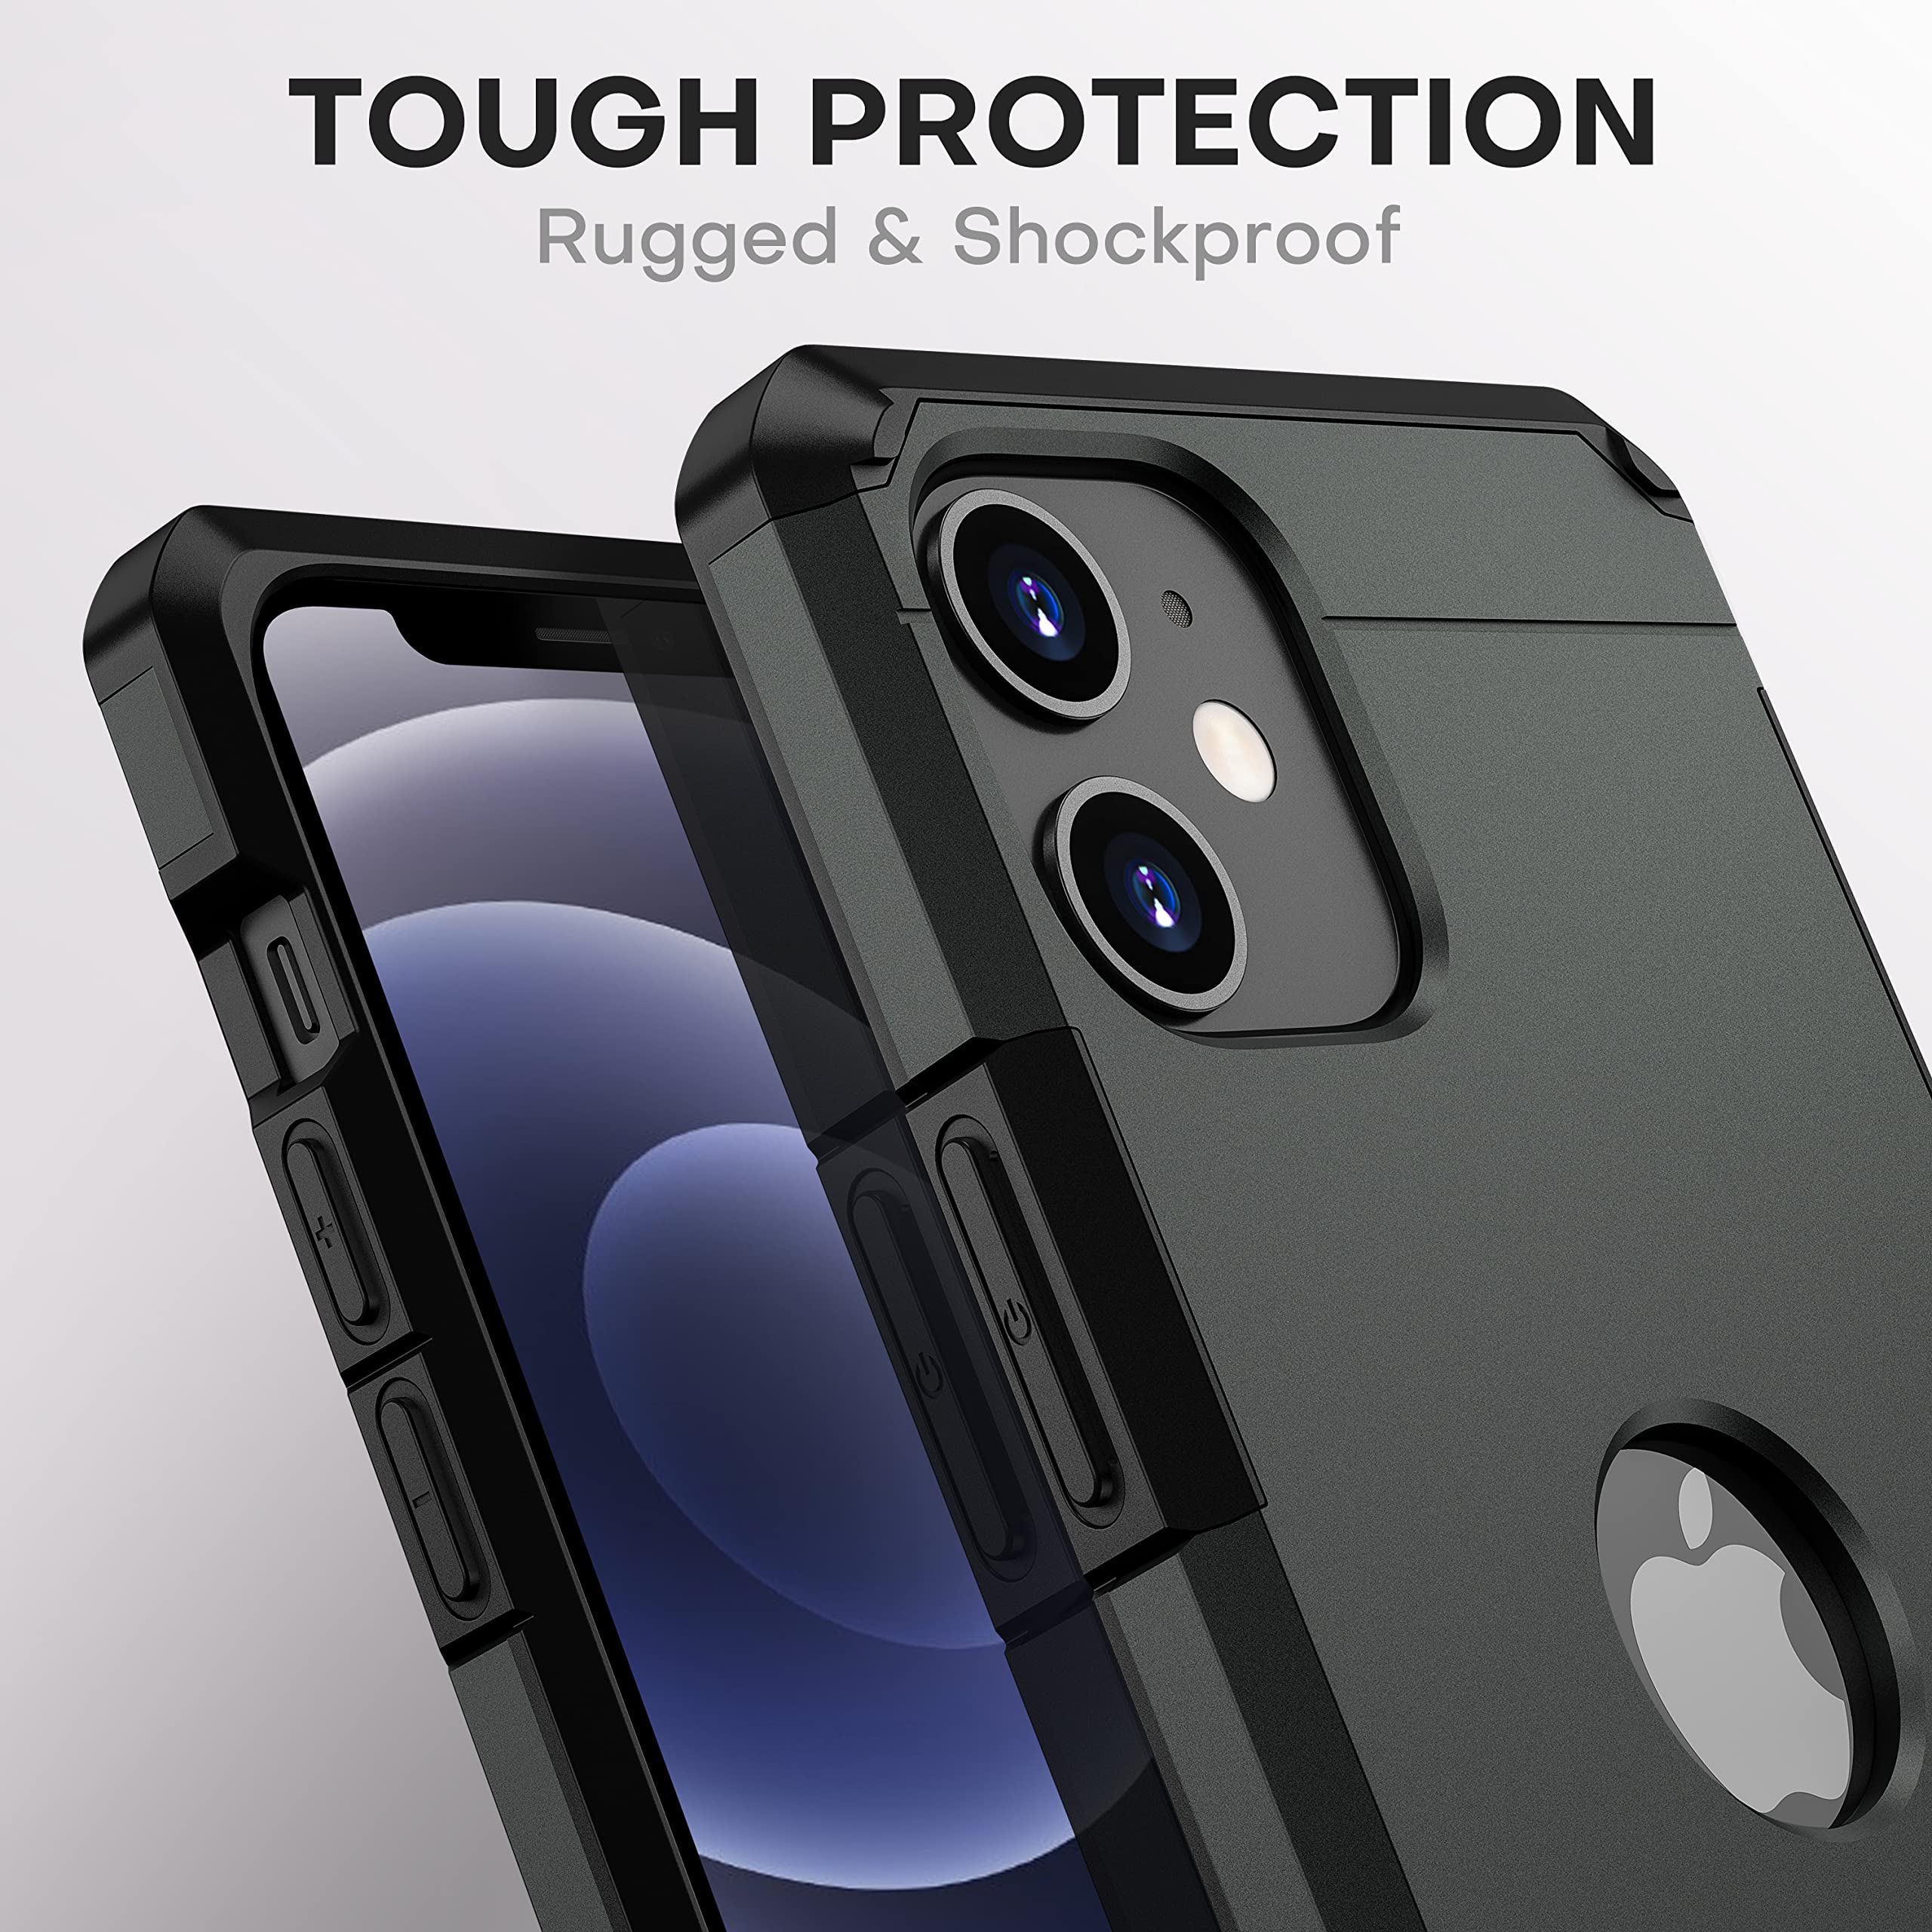 ImpactStrong iPhone 12 Mini Case, Heavy Duty Dual Layer Protection Cover Designed for iPhone 12 Mini (5.4 Inch) - Gun Black